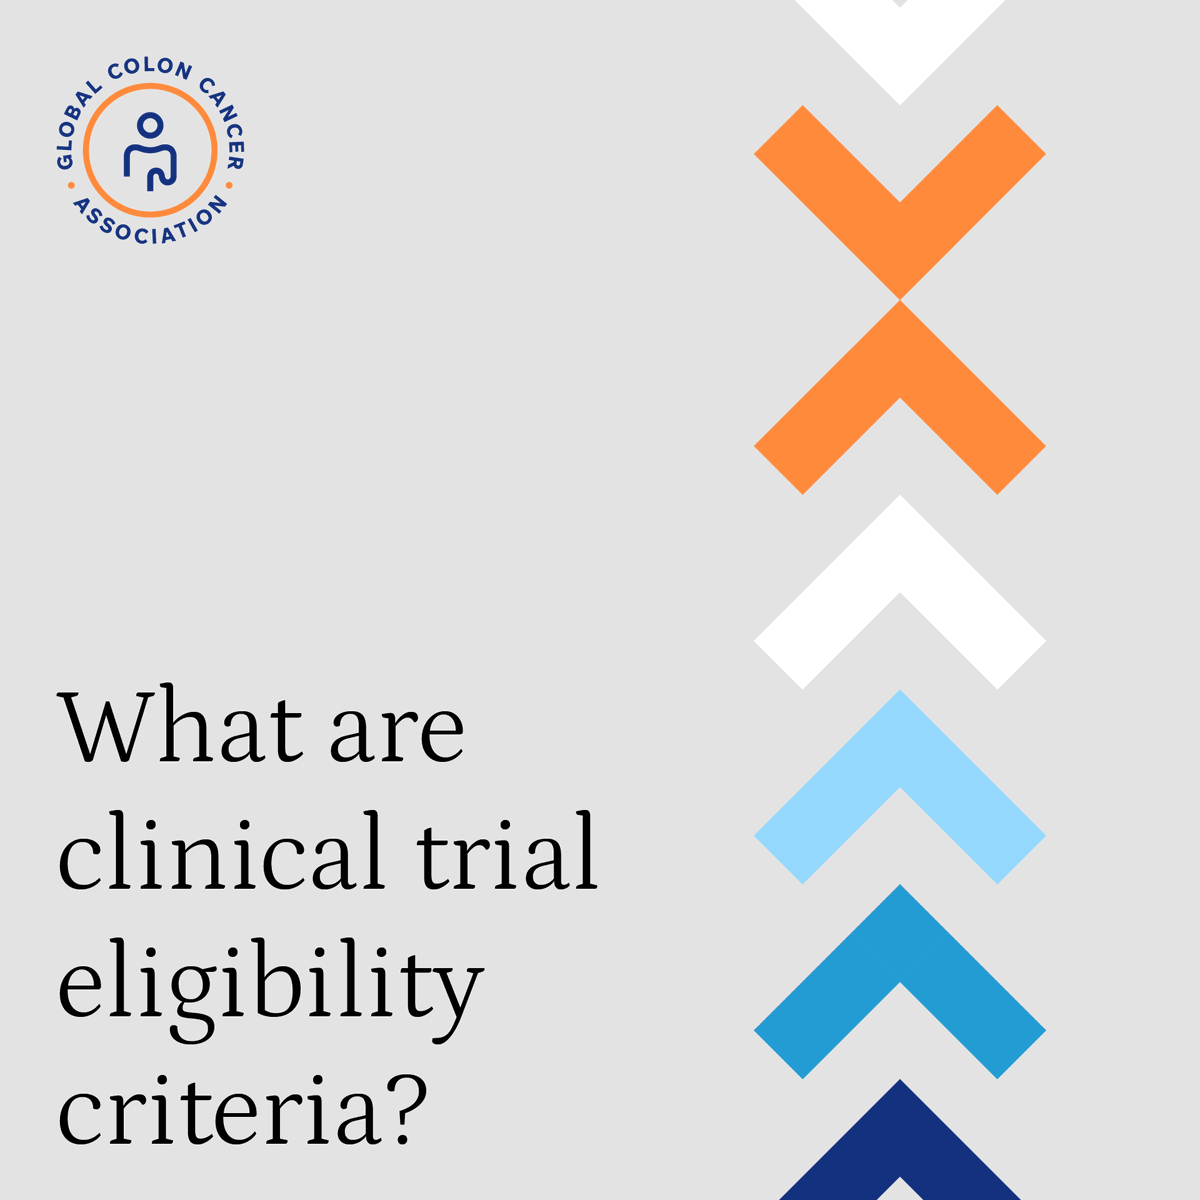 Eligibility criteria are the requirements defined for a person to participate in a clinical trial. Inclusion criteria are the characteristics that potential clinical trial participants must have to be included in the study. gcca.info/Cta_eligibility